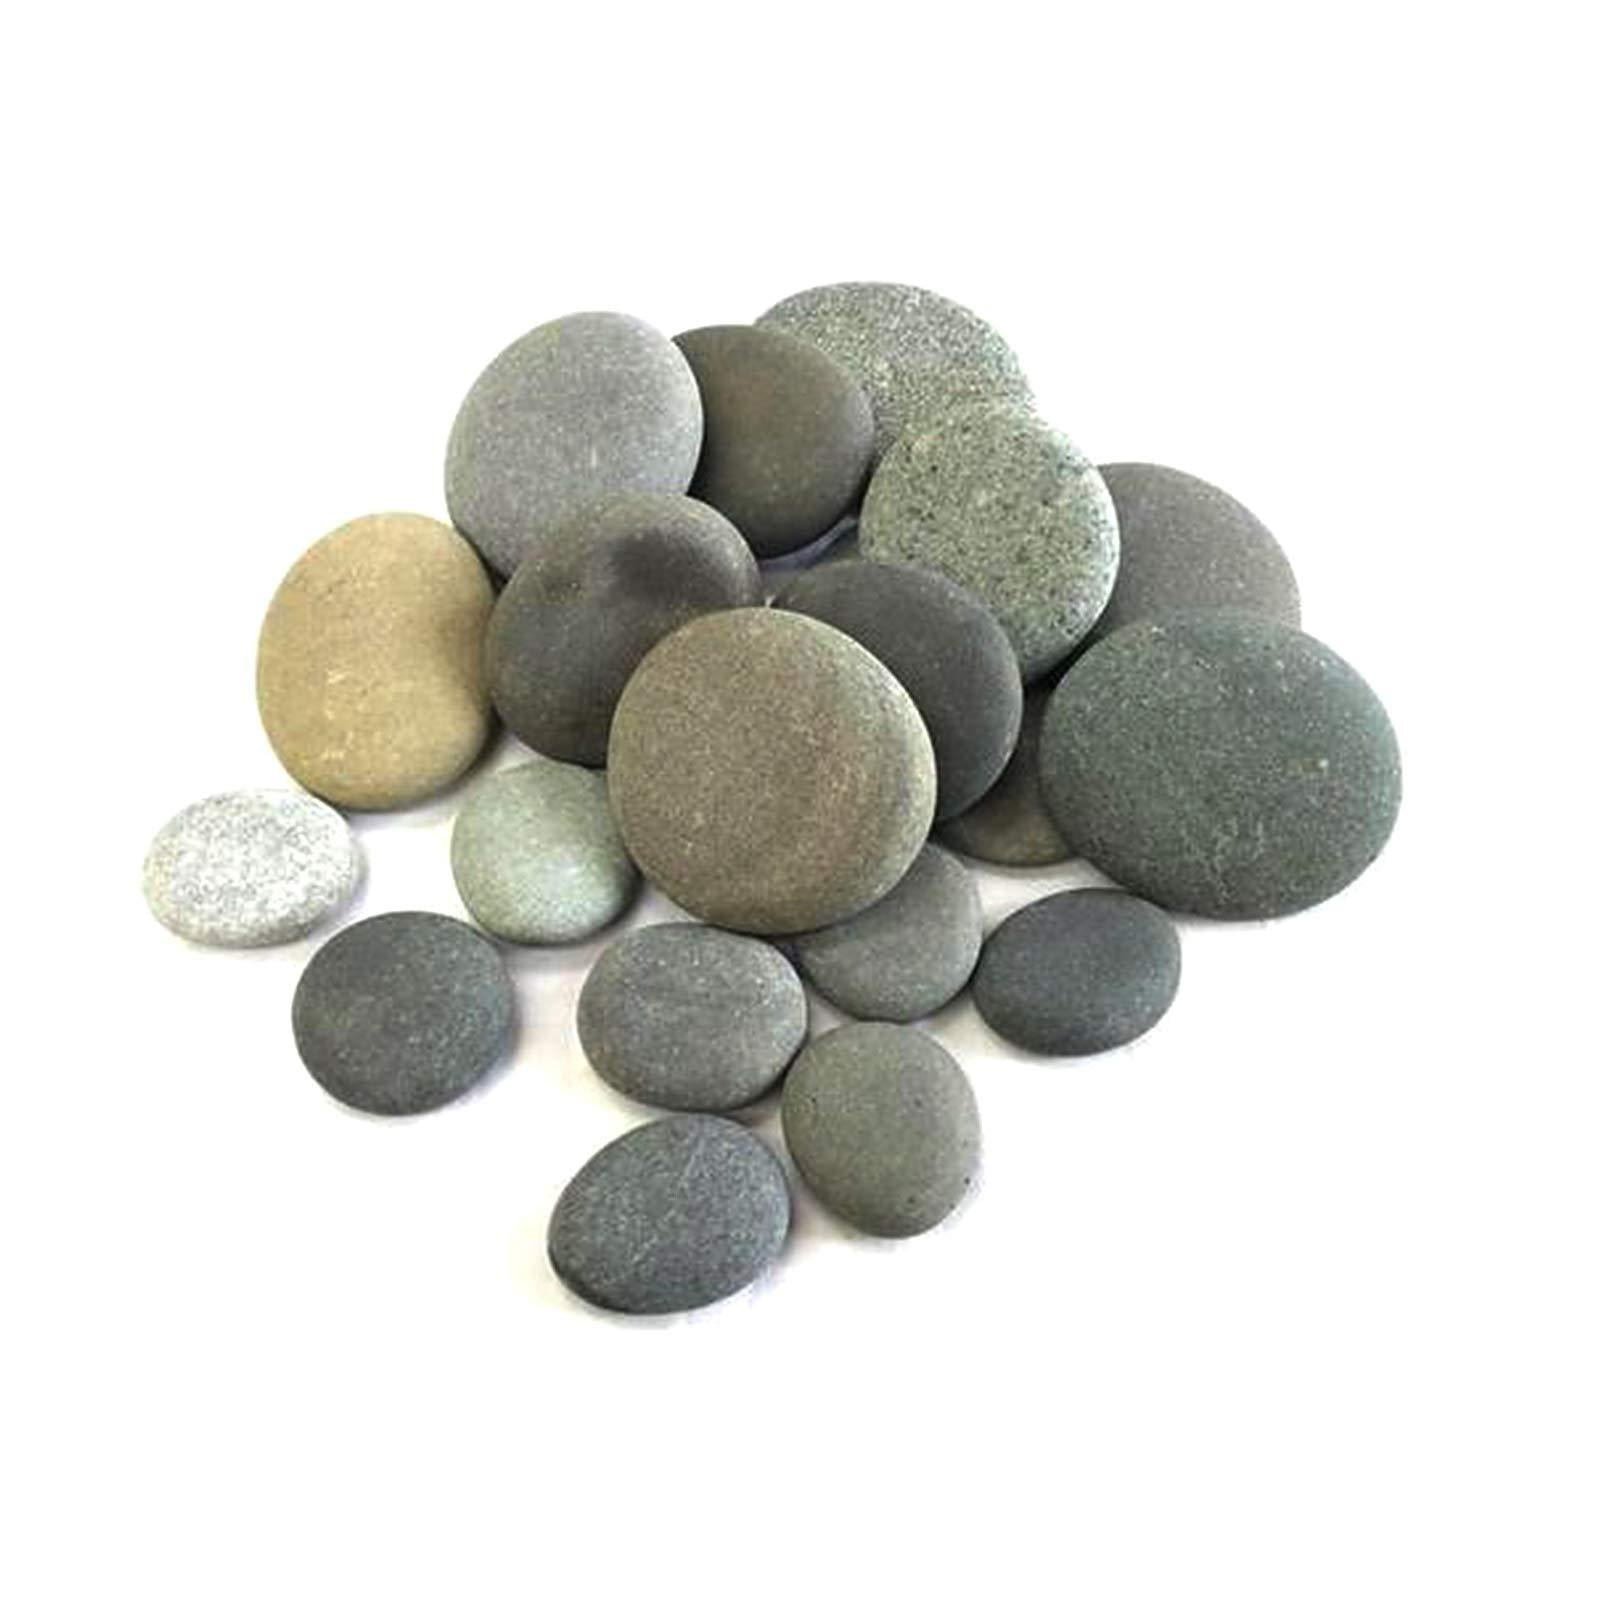 20 Pack Flat Rocks for Painting, Craft Kindness Stones for Kids